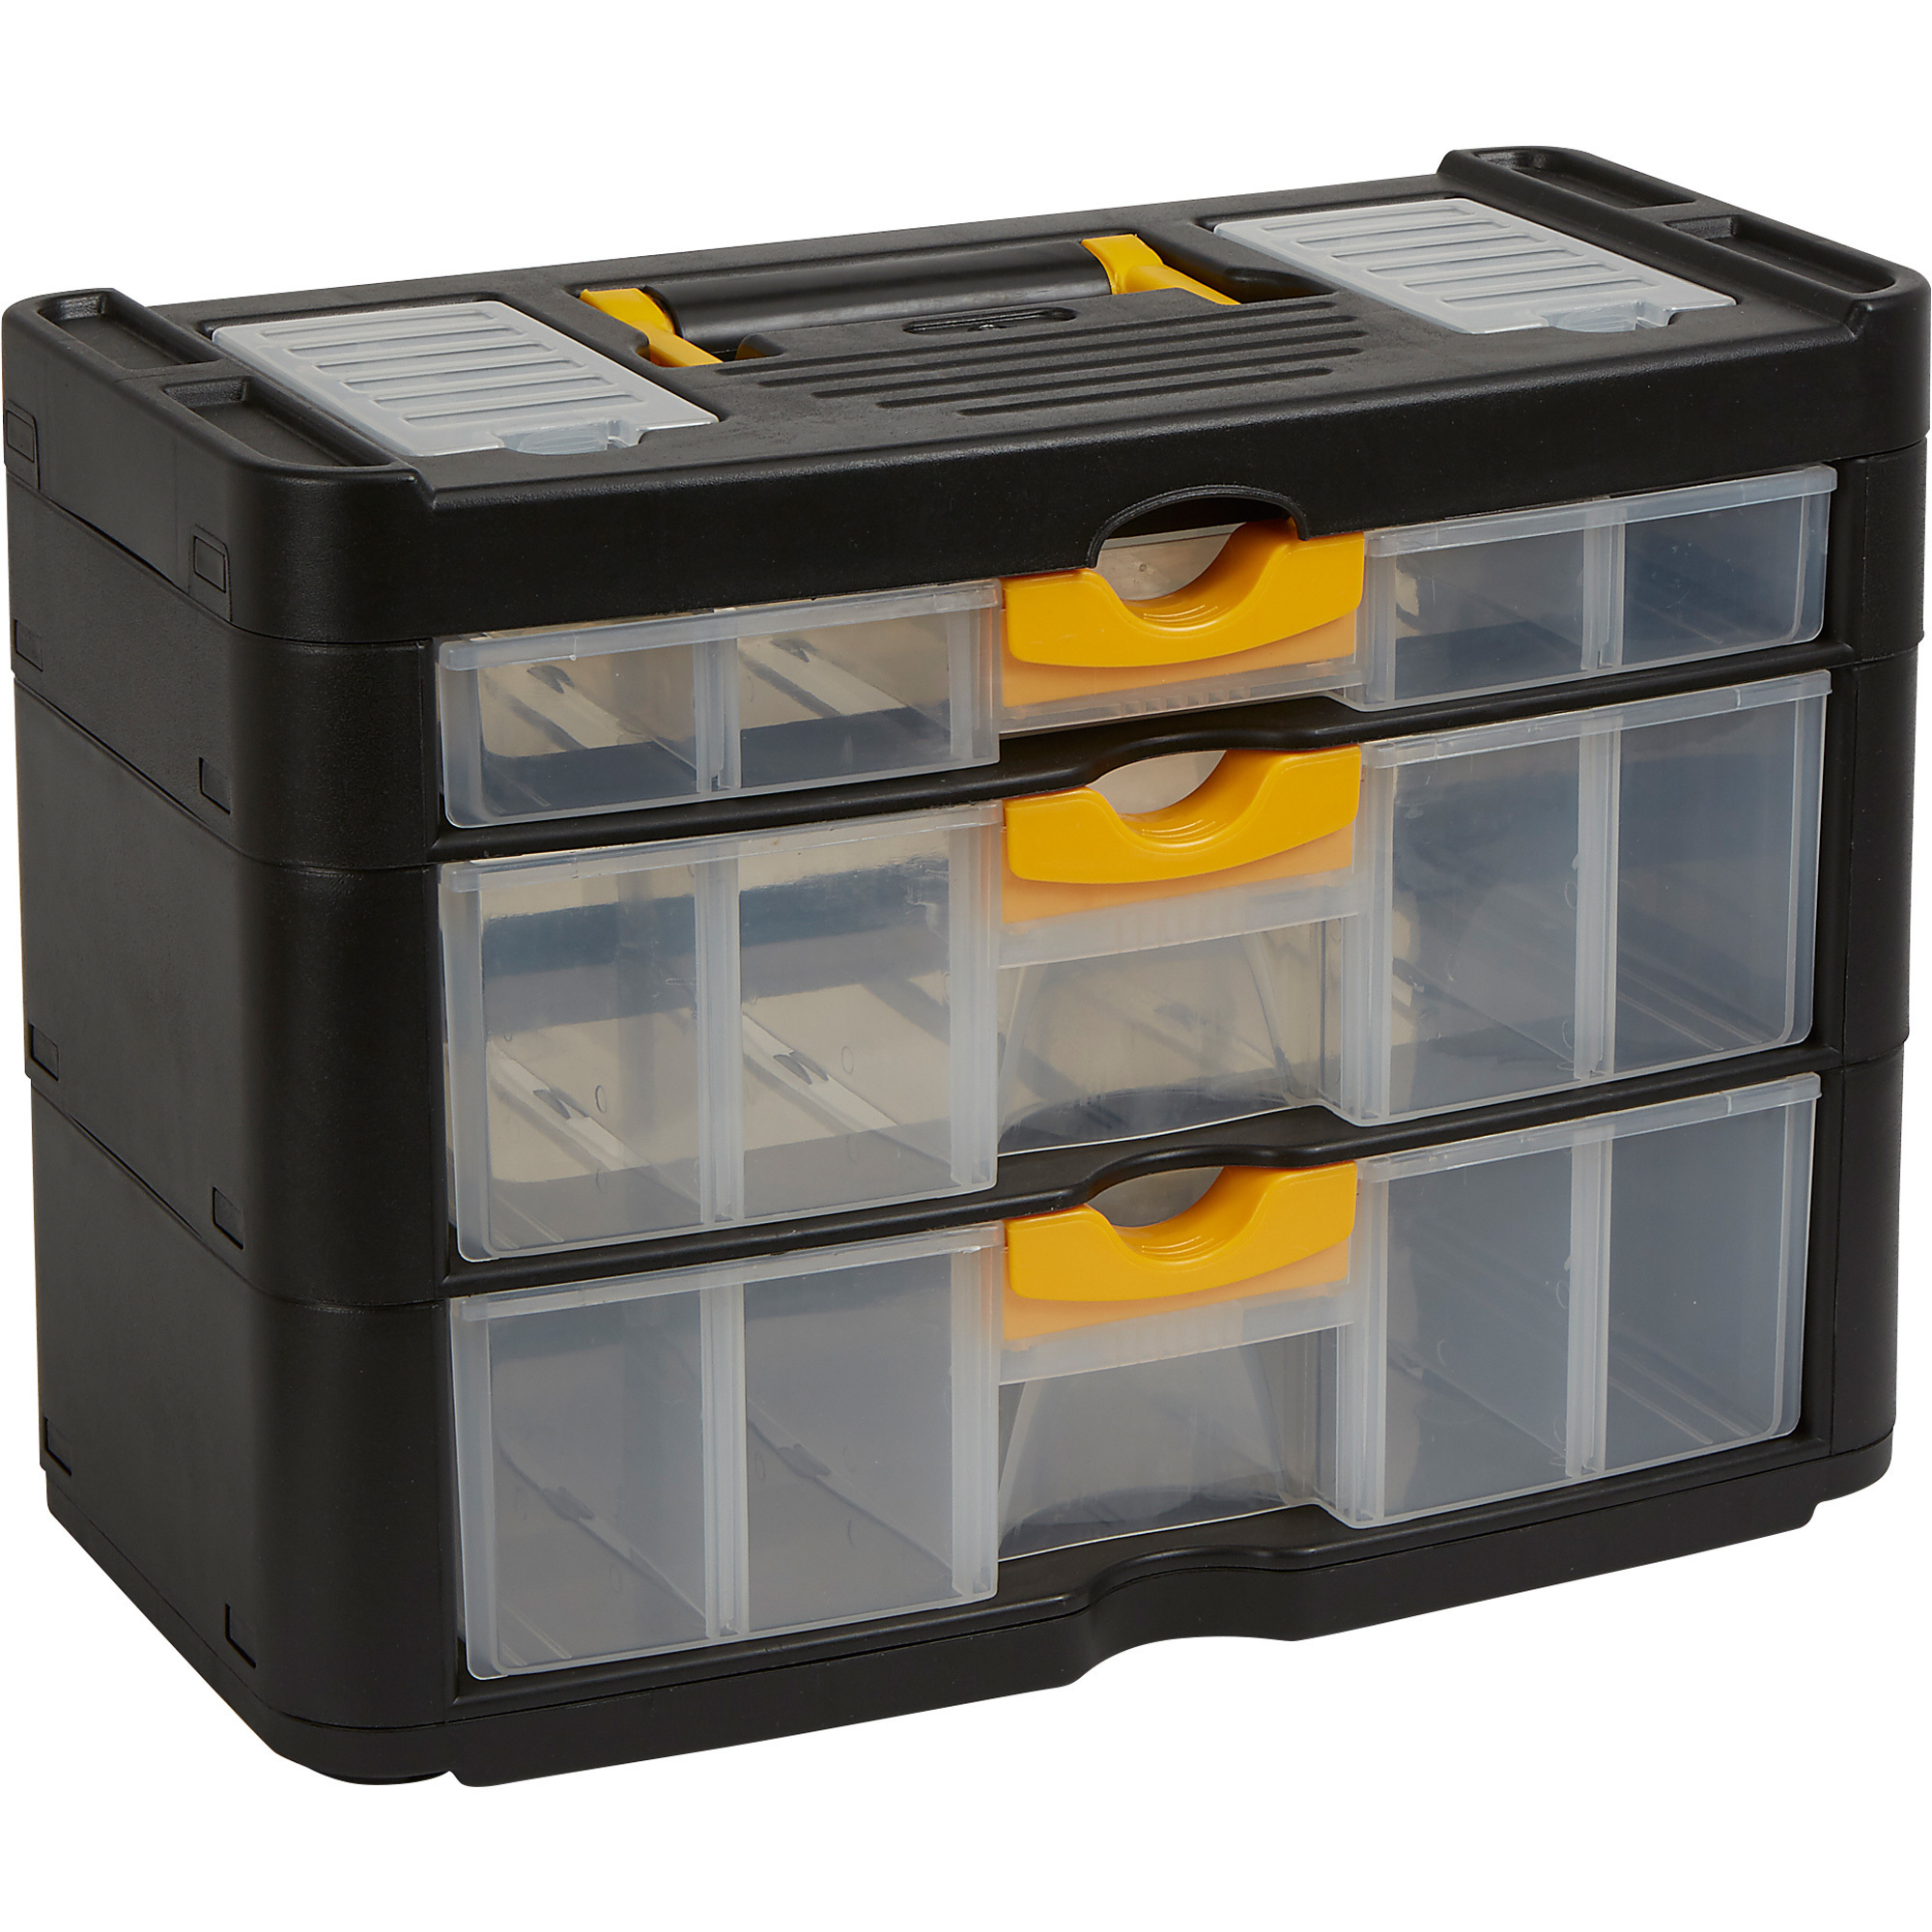 X-Space 4-Drawer Portable Storage Box, 15 11/16in.W x 7 11/16in.D